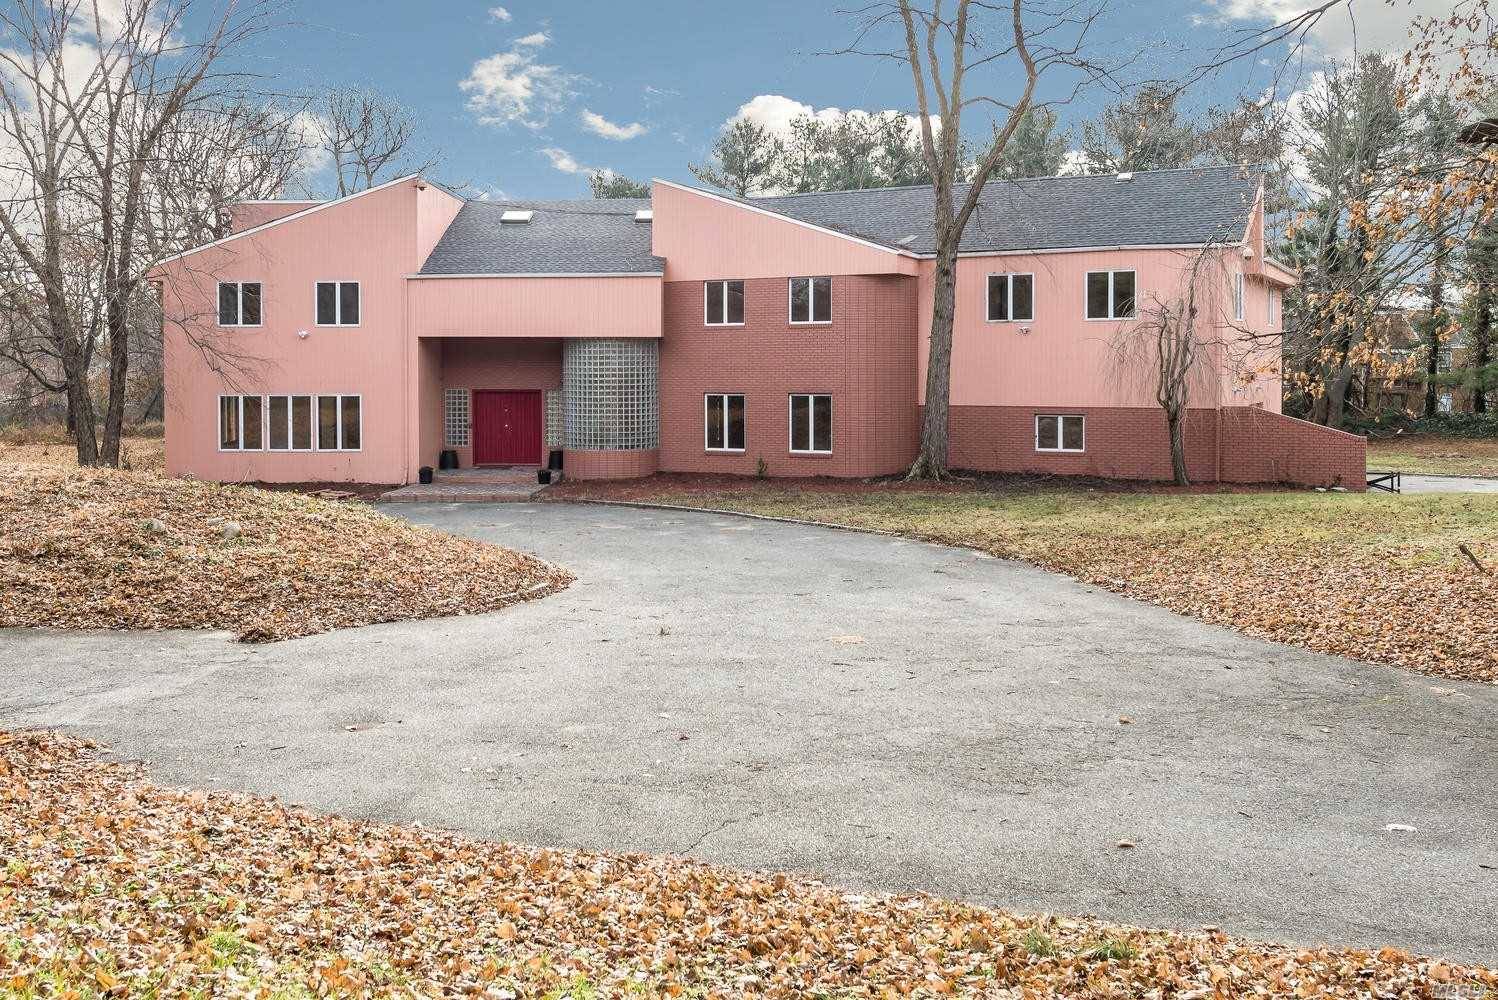 Long Driveway Leads To Private Post Modern Home In Old Westbury.